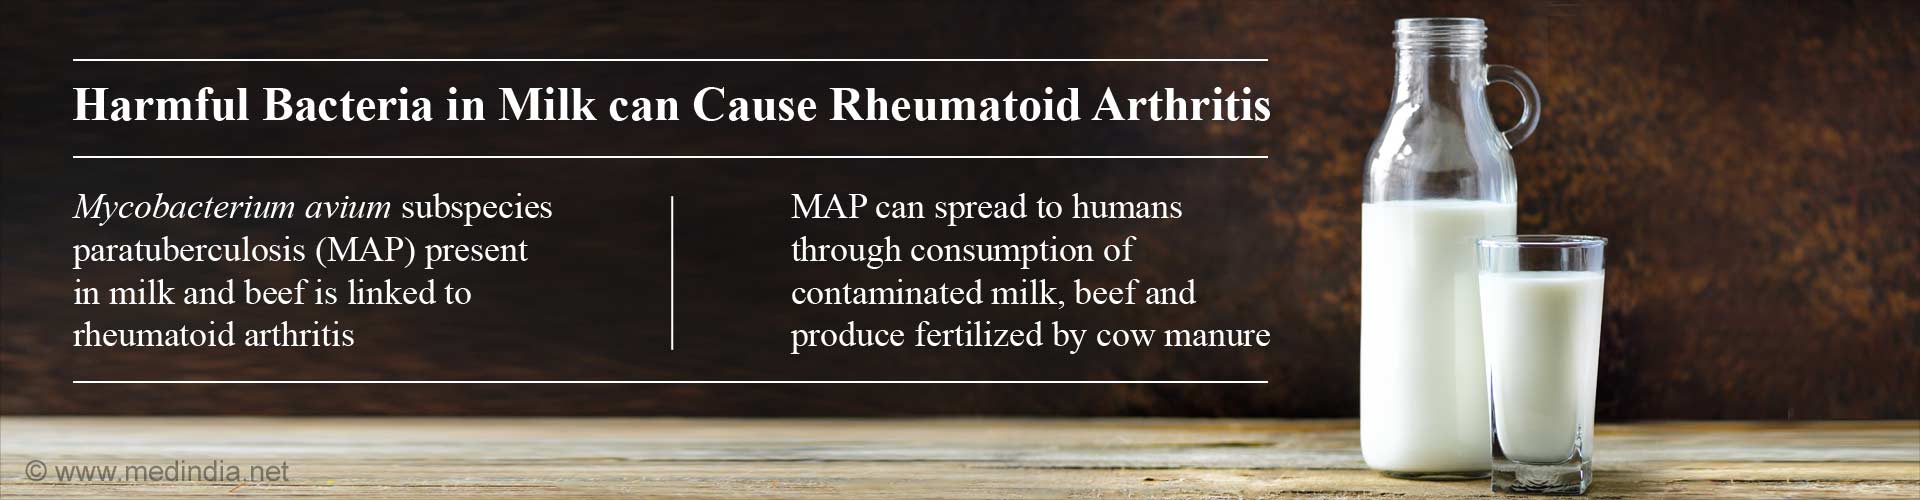 harmful bacteria in milk can cause rheumatoid arthritis
- mycobacterium avium subspecies paratuberculosis (MAP) present in milk and beef is linked to rheumatoid arthritis
- MAP can spread to humans through consumption of contaminated milk, beef and produce fertilized by cow manure